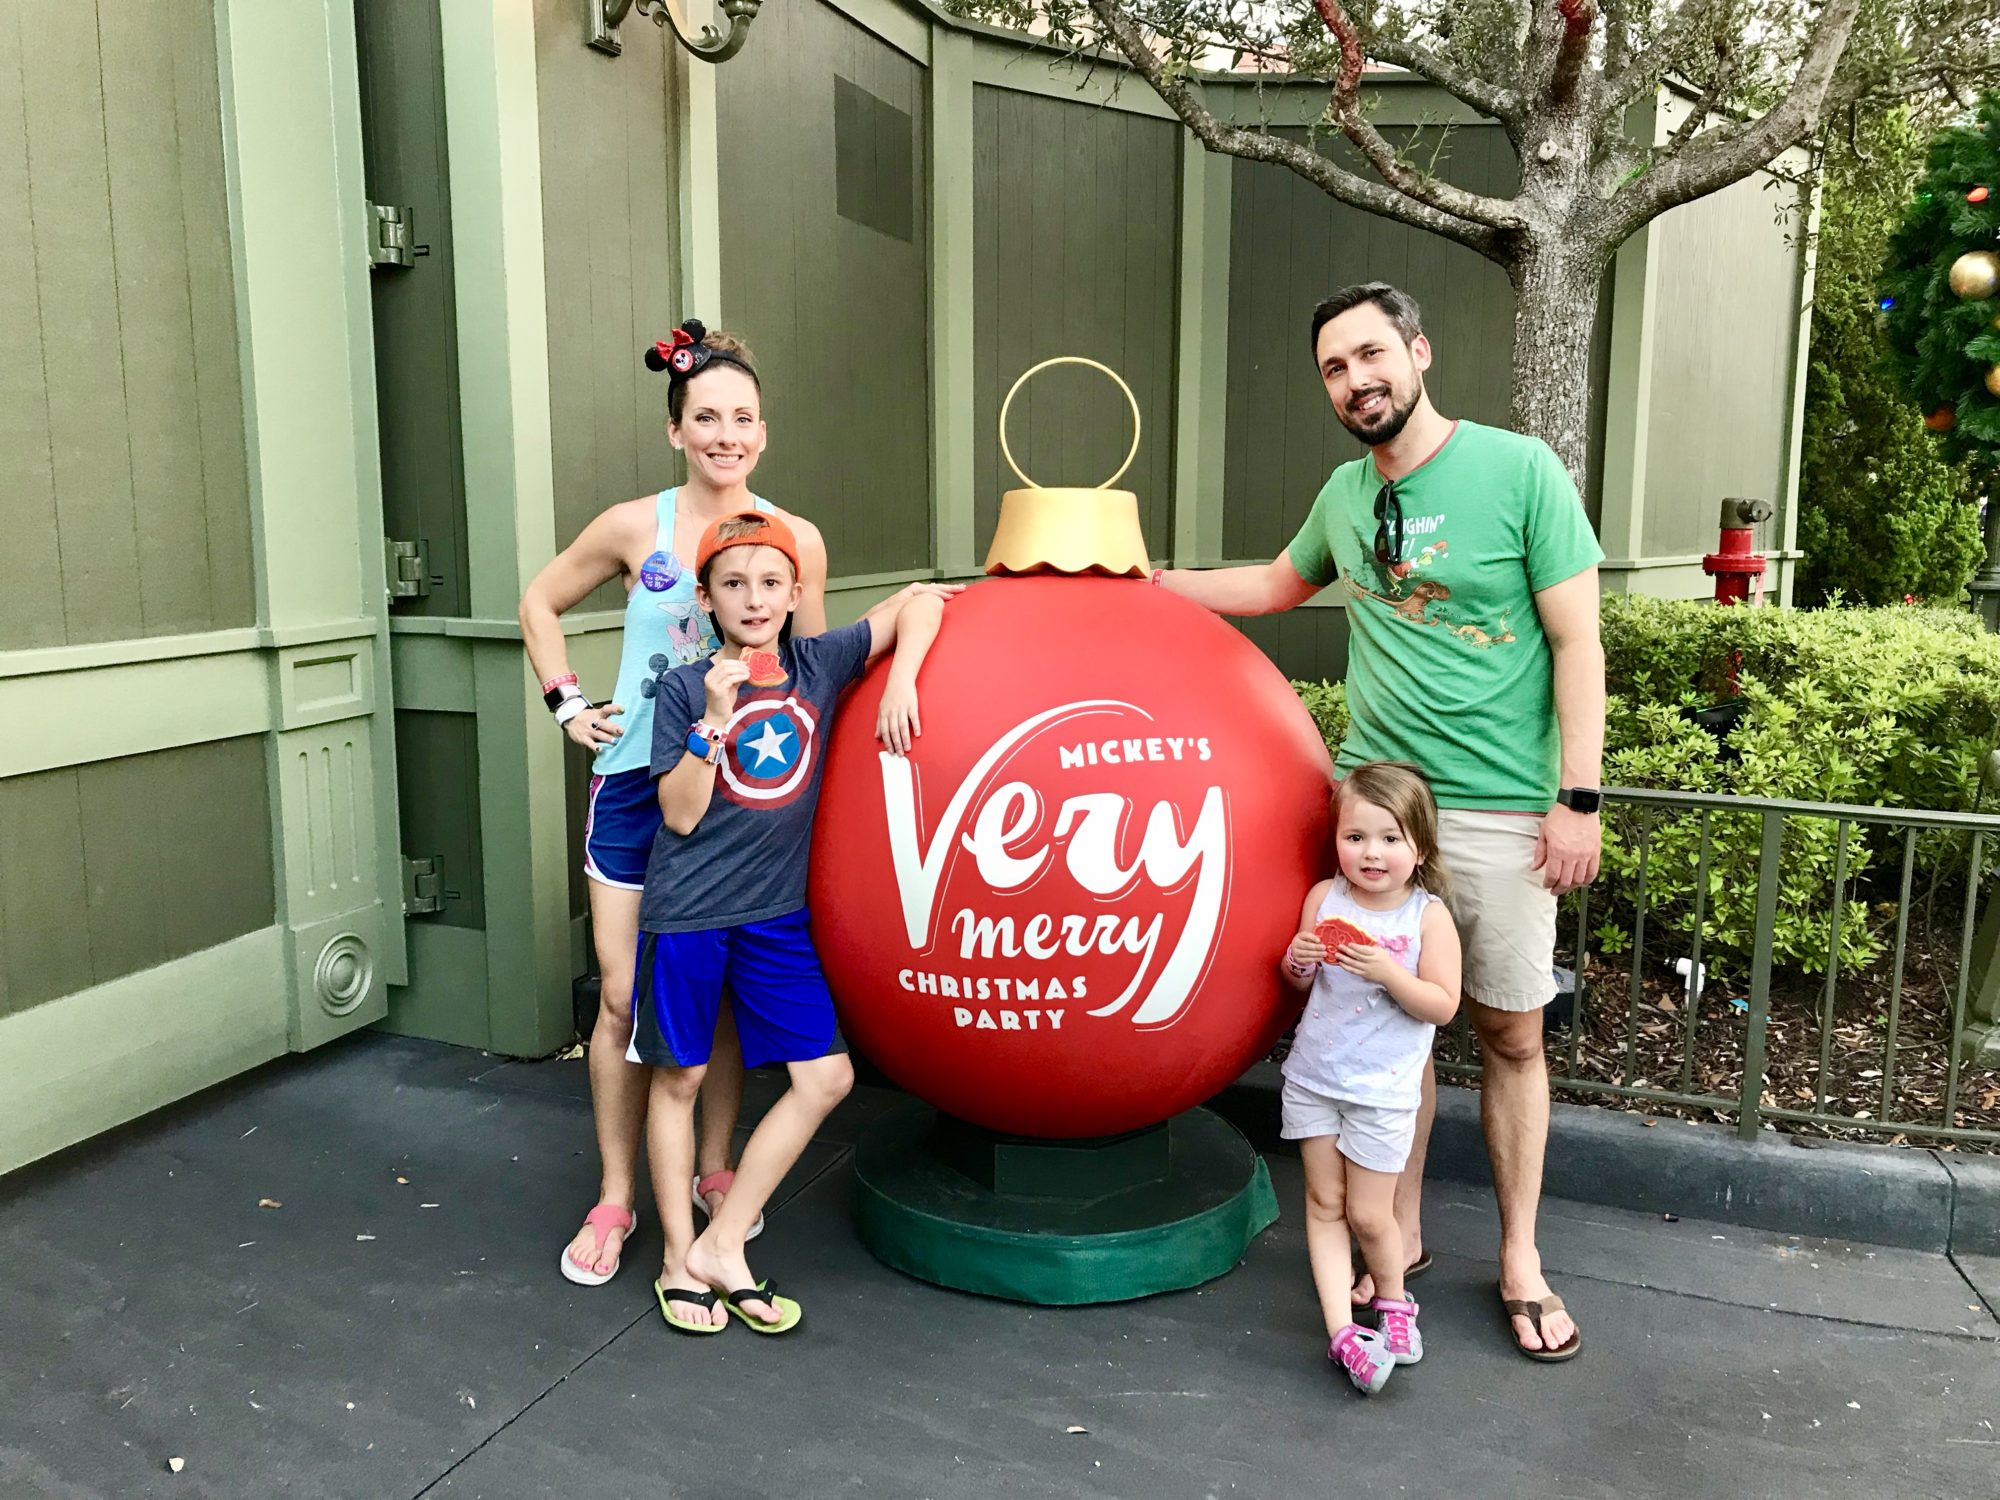 Mickey’s Very Merry Christmas Party is Festive Family Fun